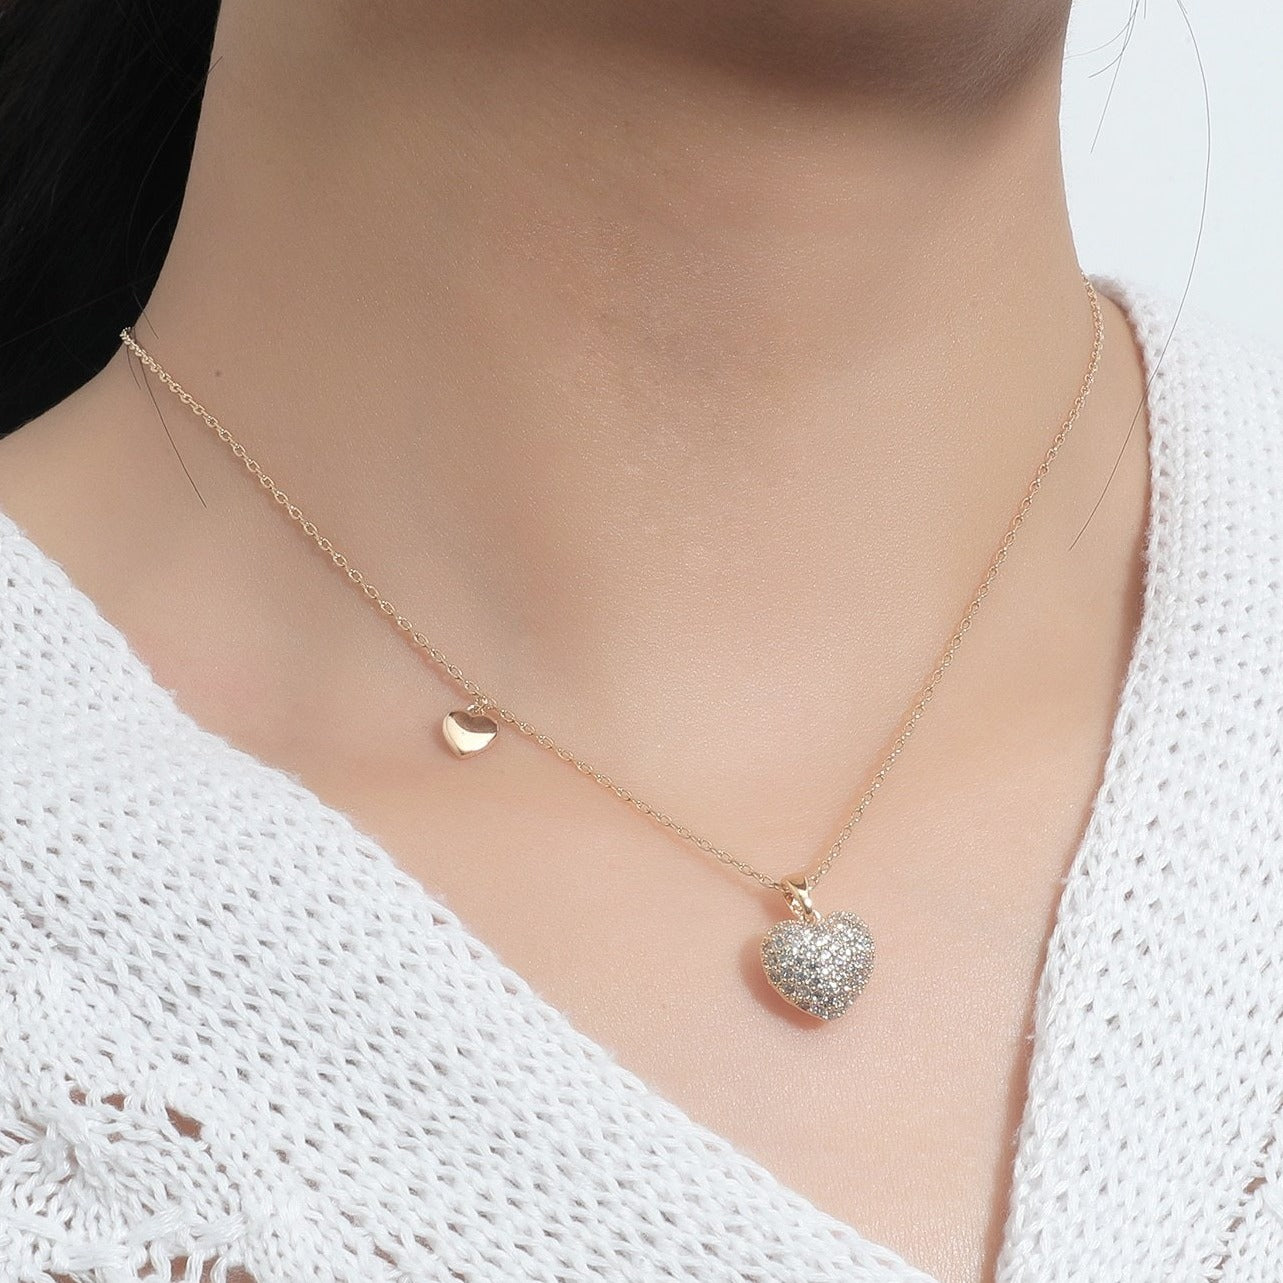 White Gold Heart Shaped Necklace